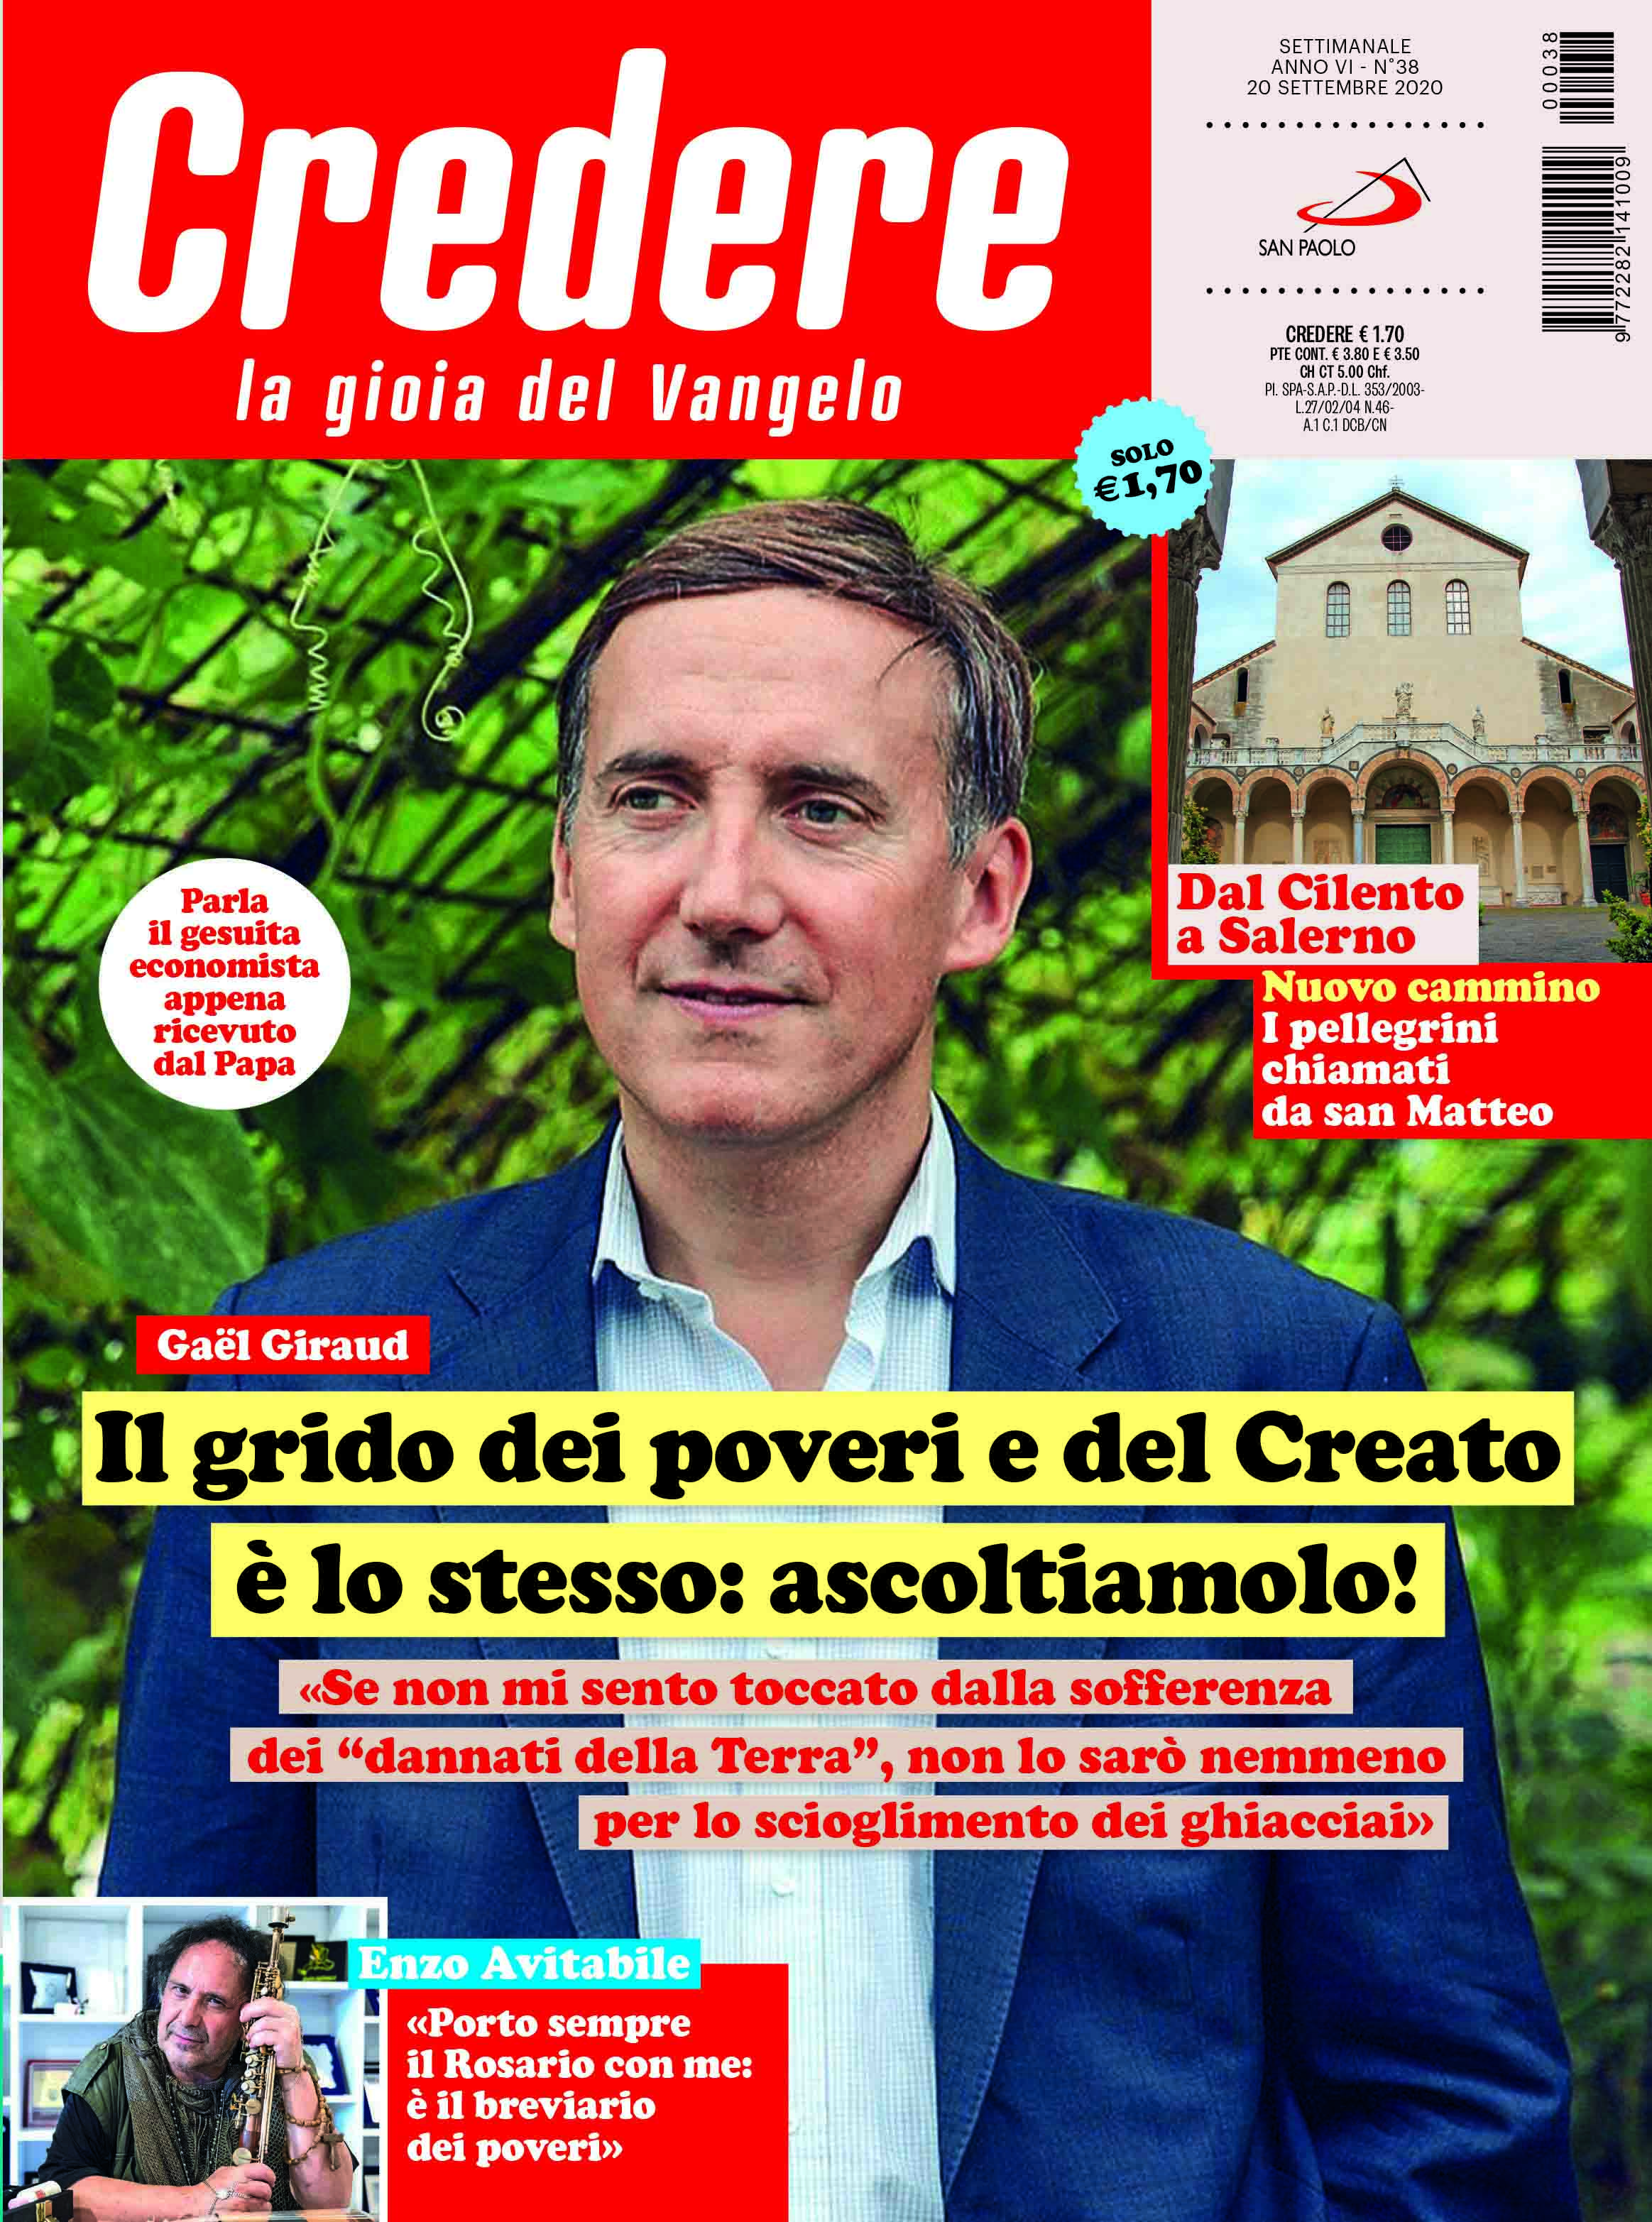 Credere_cover.jpg